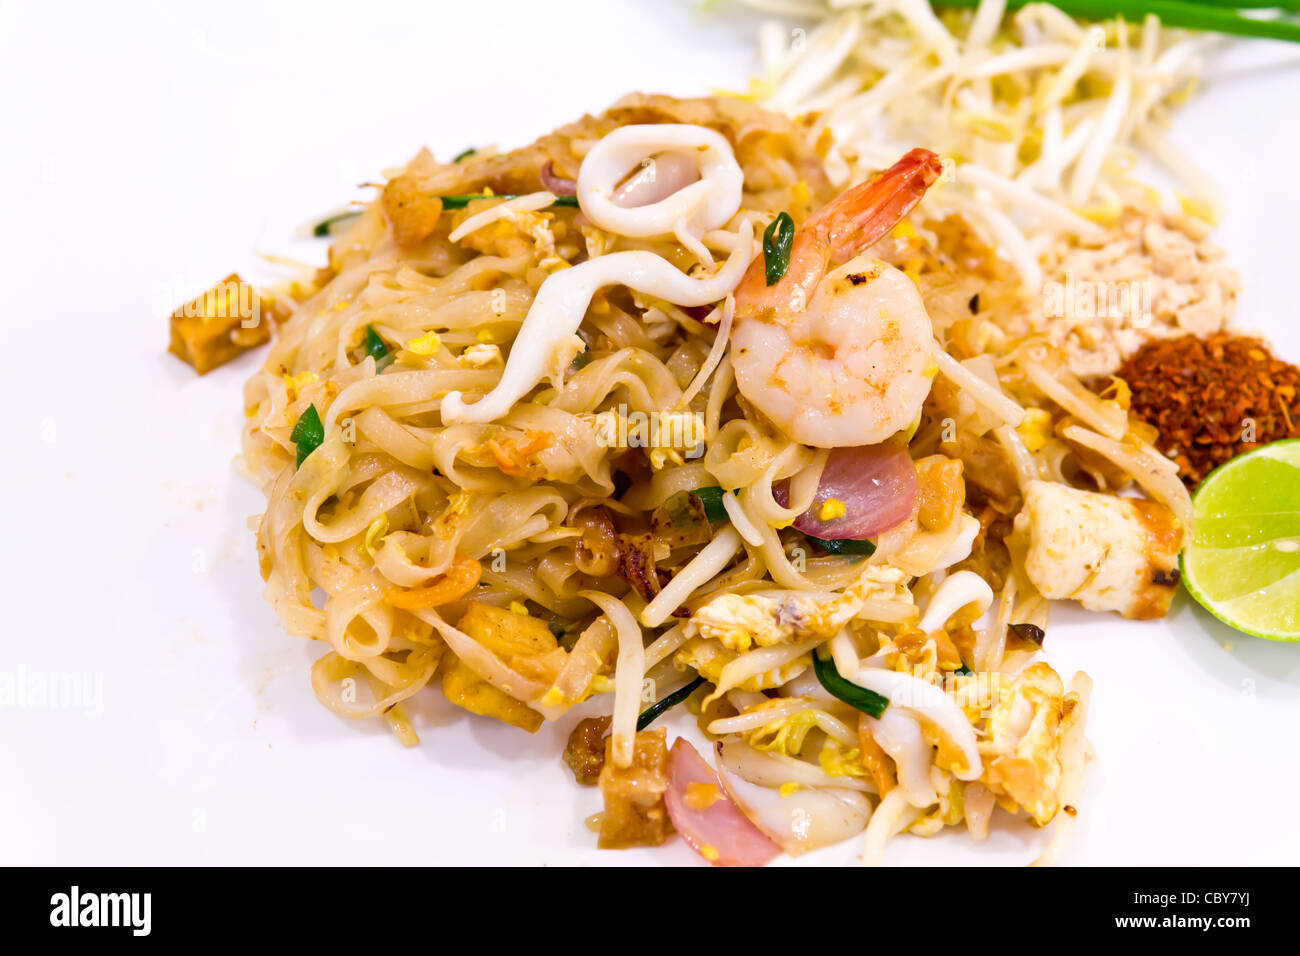 Seafood pad Thai dish of fried rice noodles on a white plate Stock Photo